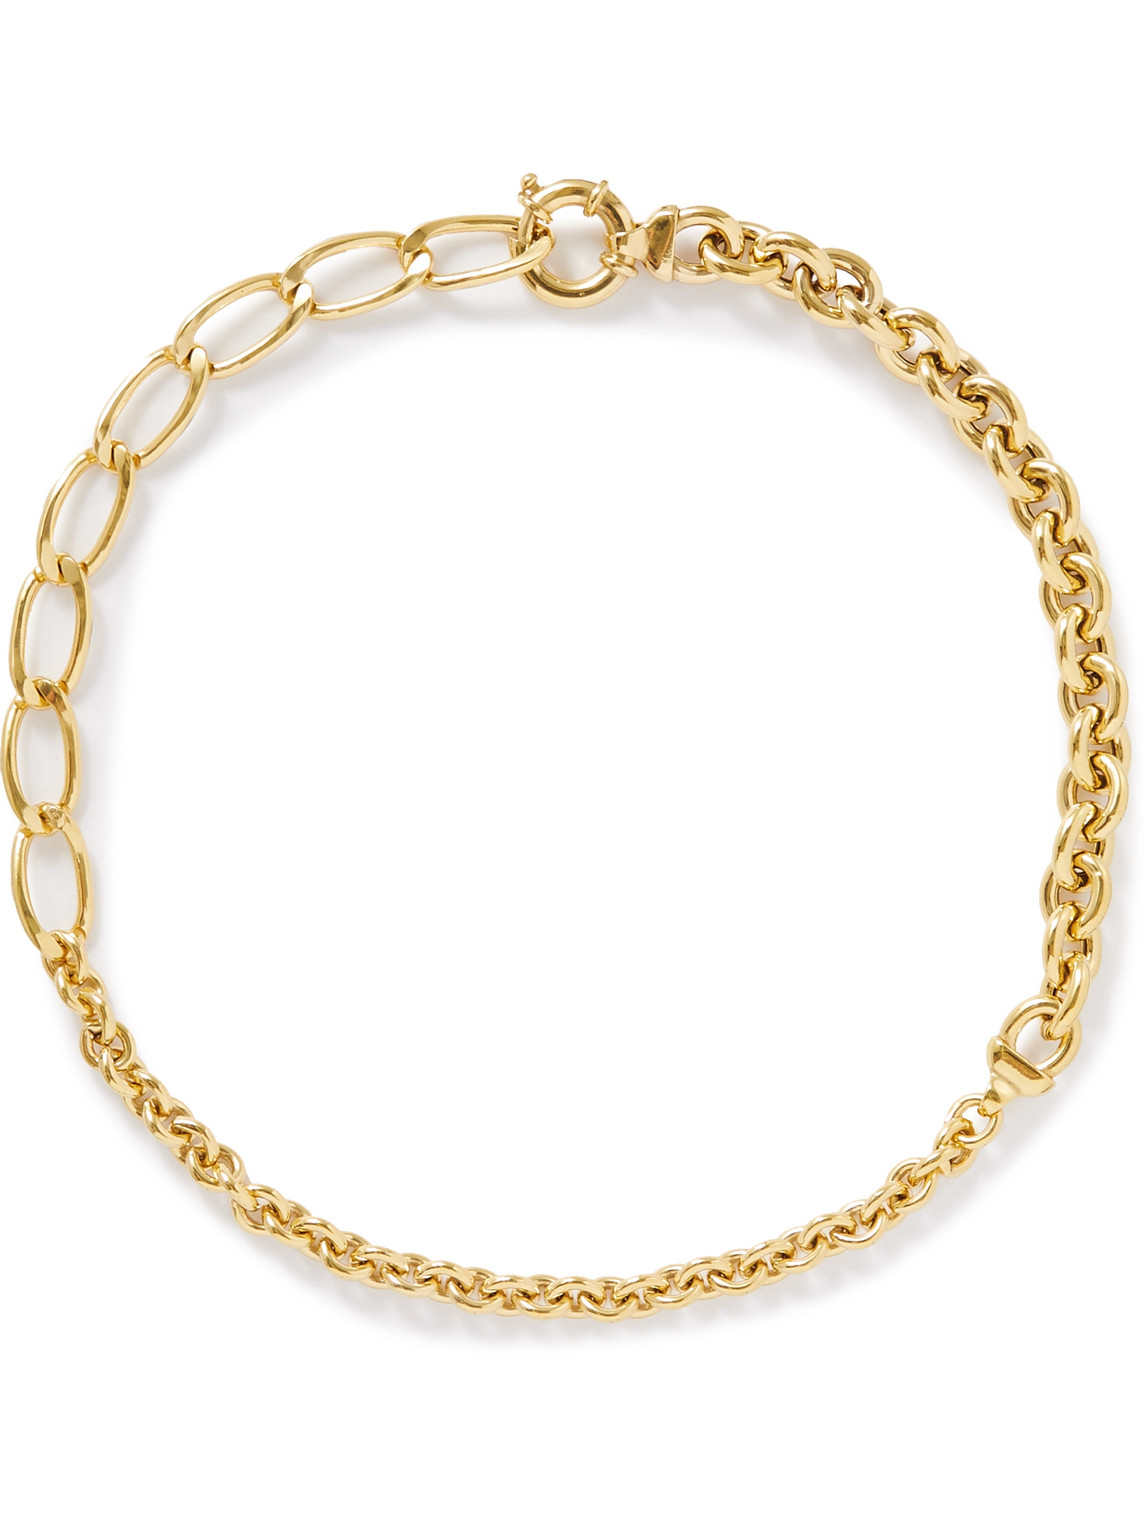 Alice Made This - Trilogy 24-Karat Gold-Plated Chain Necklace - Men - Gold von Alice Made This